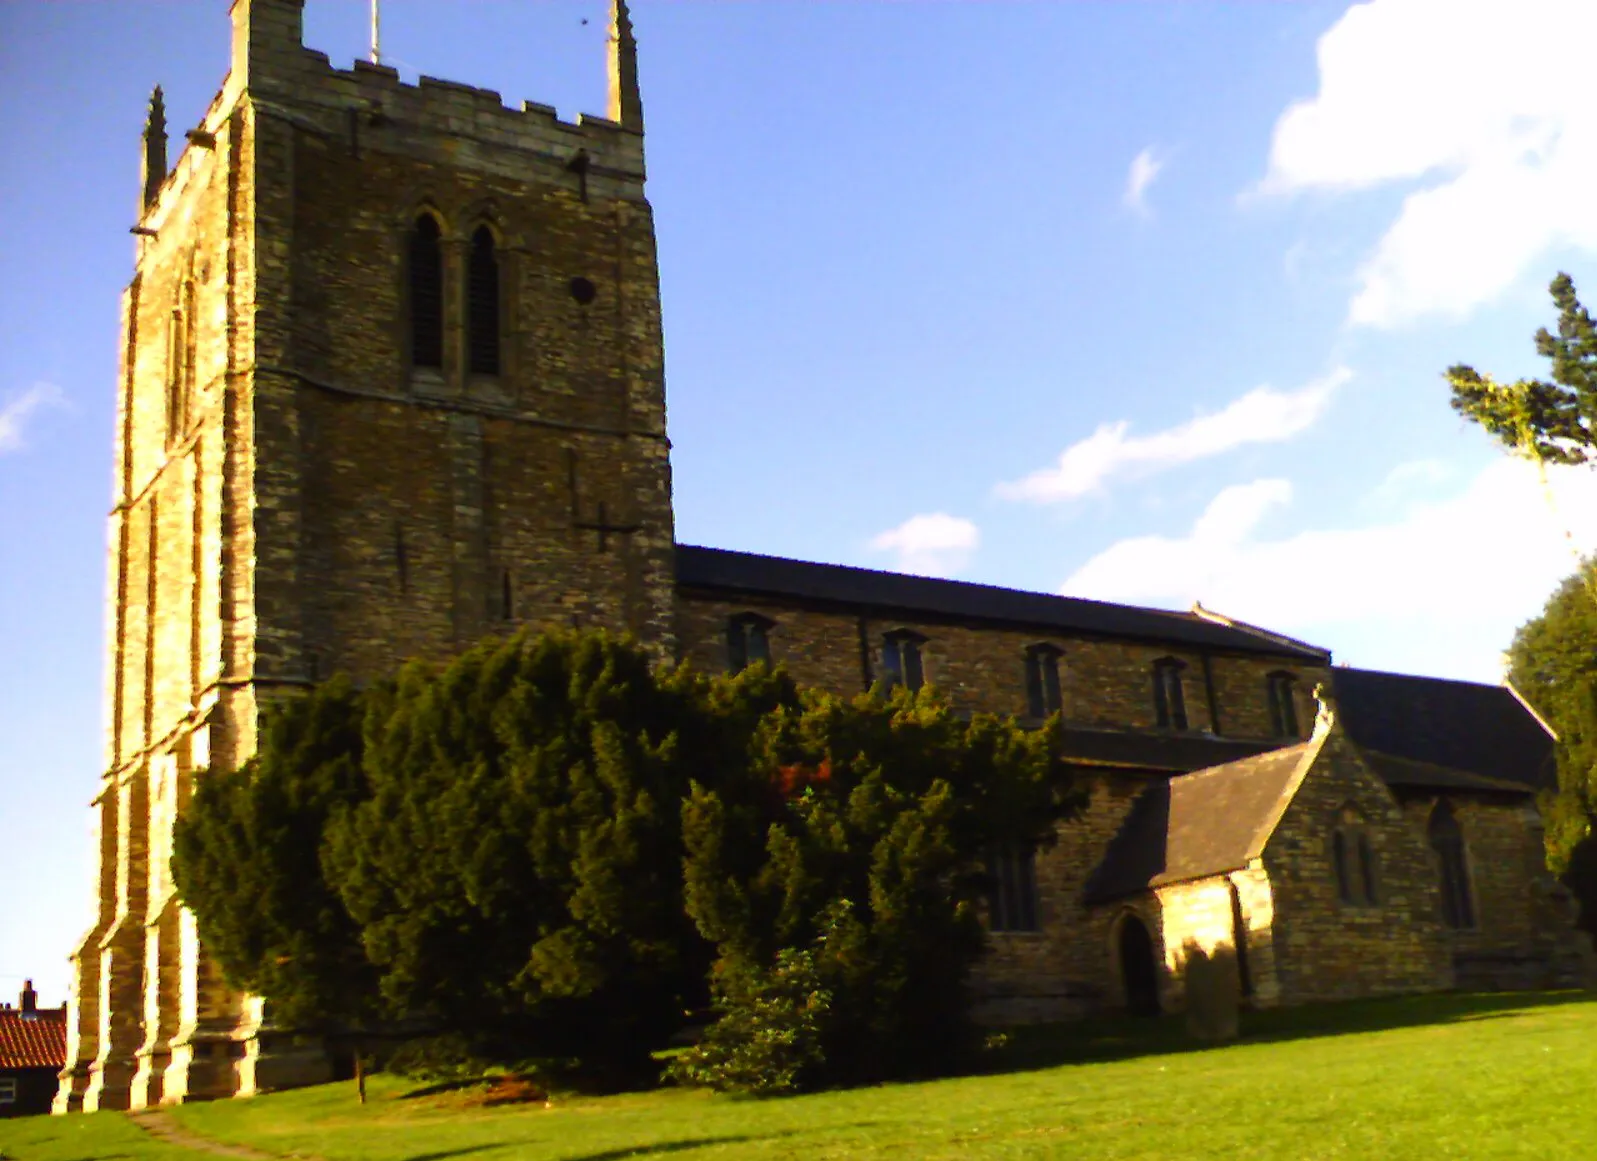 Photo showing: Saint Andrew's Church, Kirton in Lindsey, Lincolnshire. Photo by E Asterion u talking to me? 21:23, 11 August 2006 (UTC)